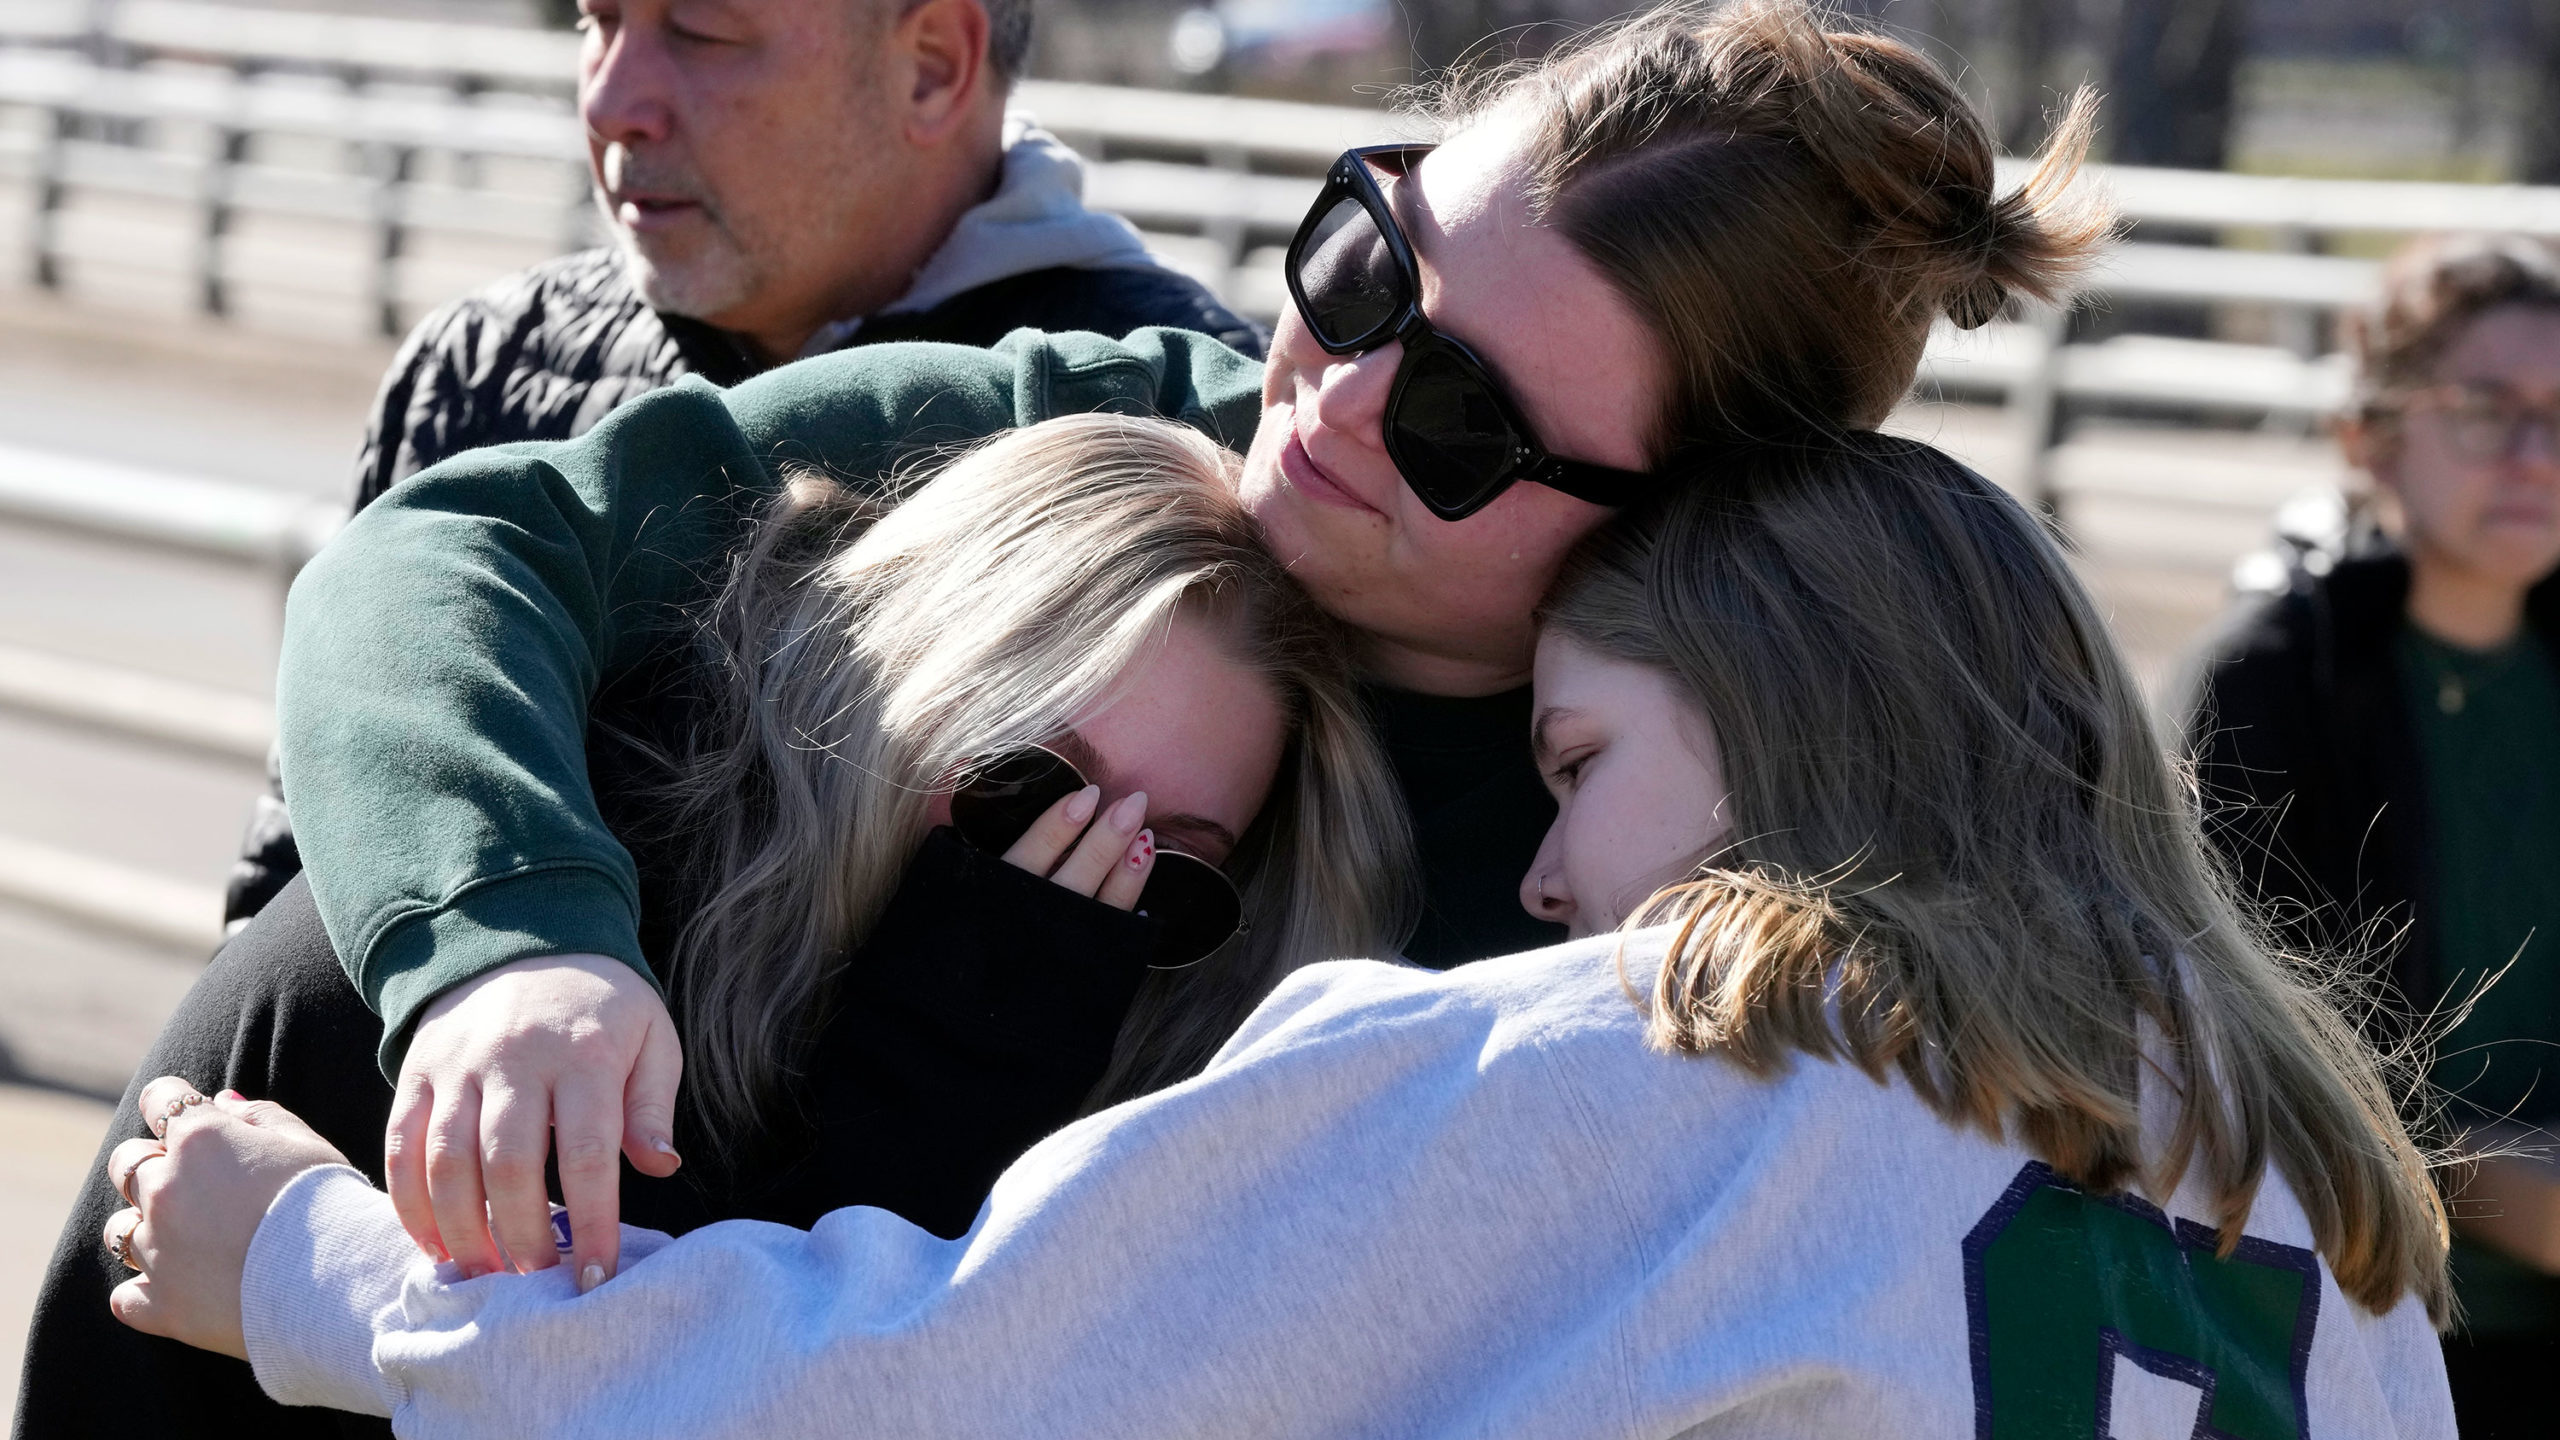 students react tearfully to Michigan shooting...